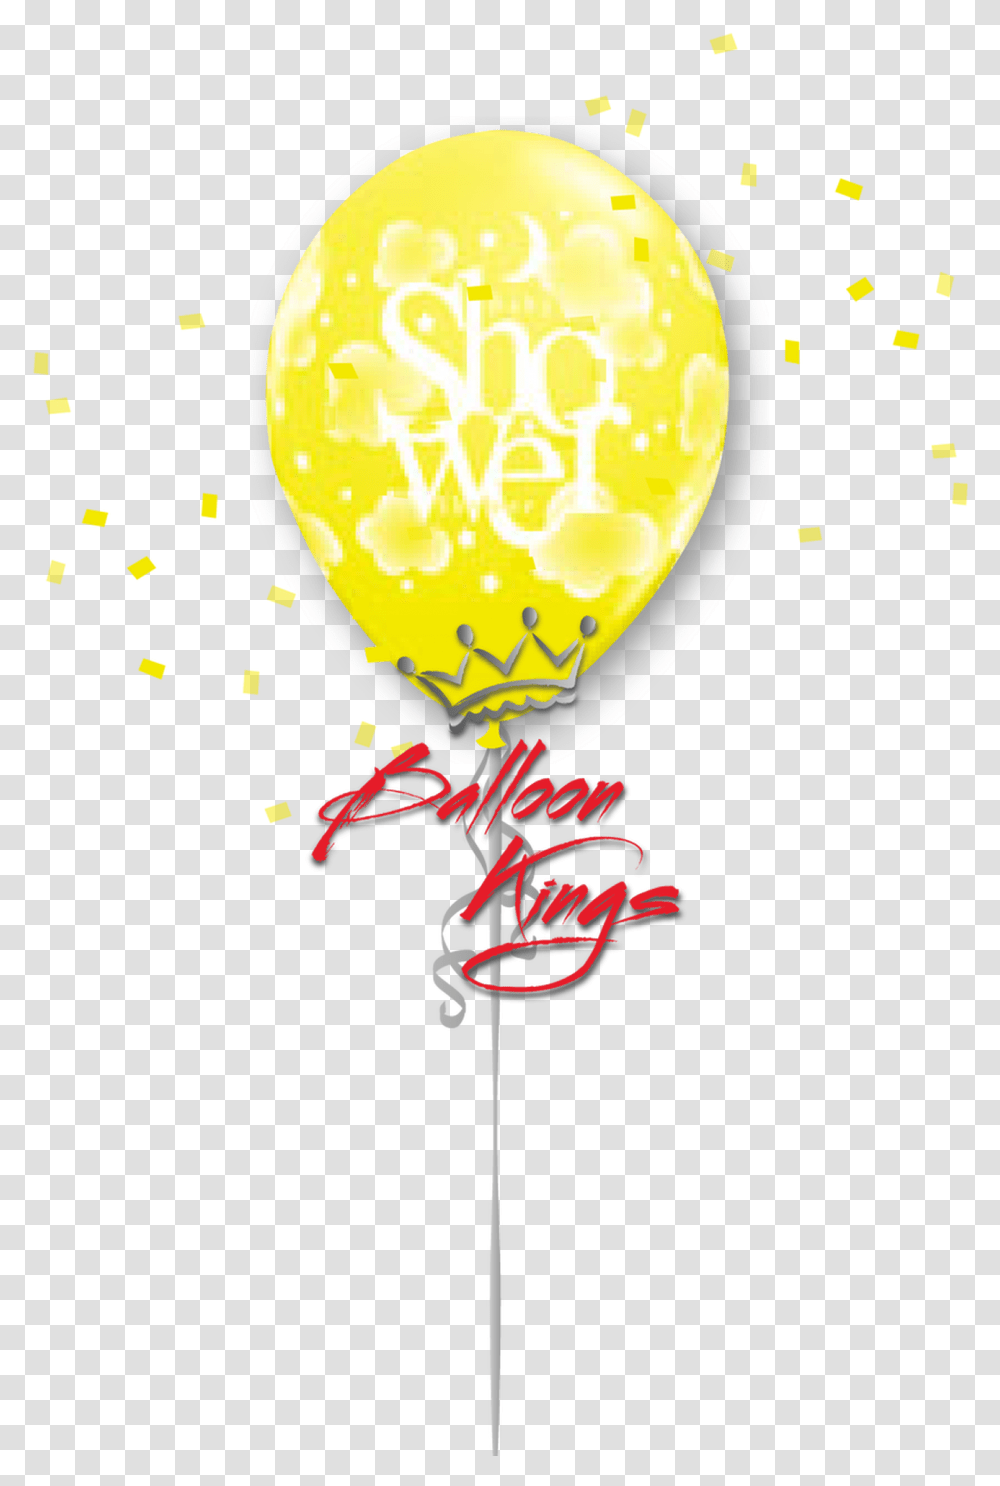 Latex Baby Shower Heavenly Illustration, Balloon, Lamp, Paper, Confetti Transparent Png